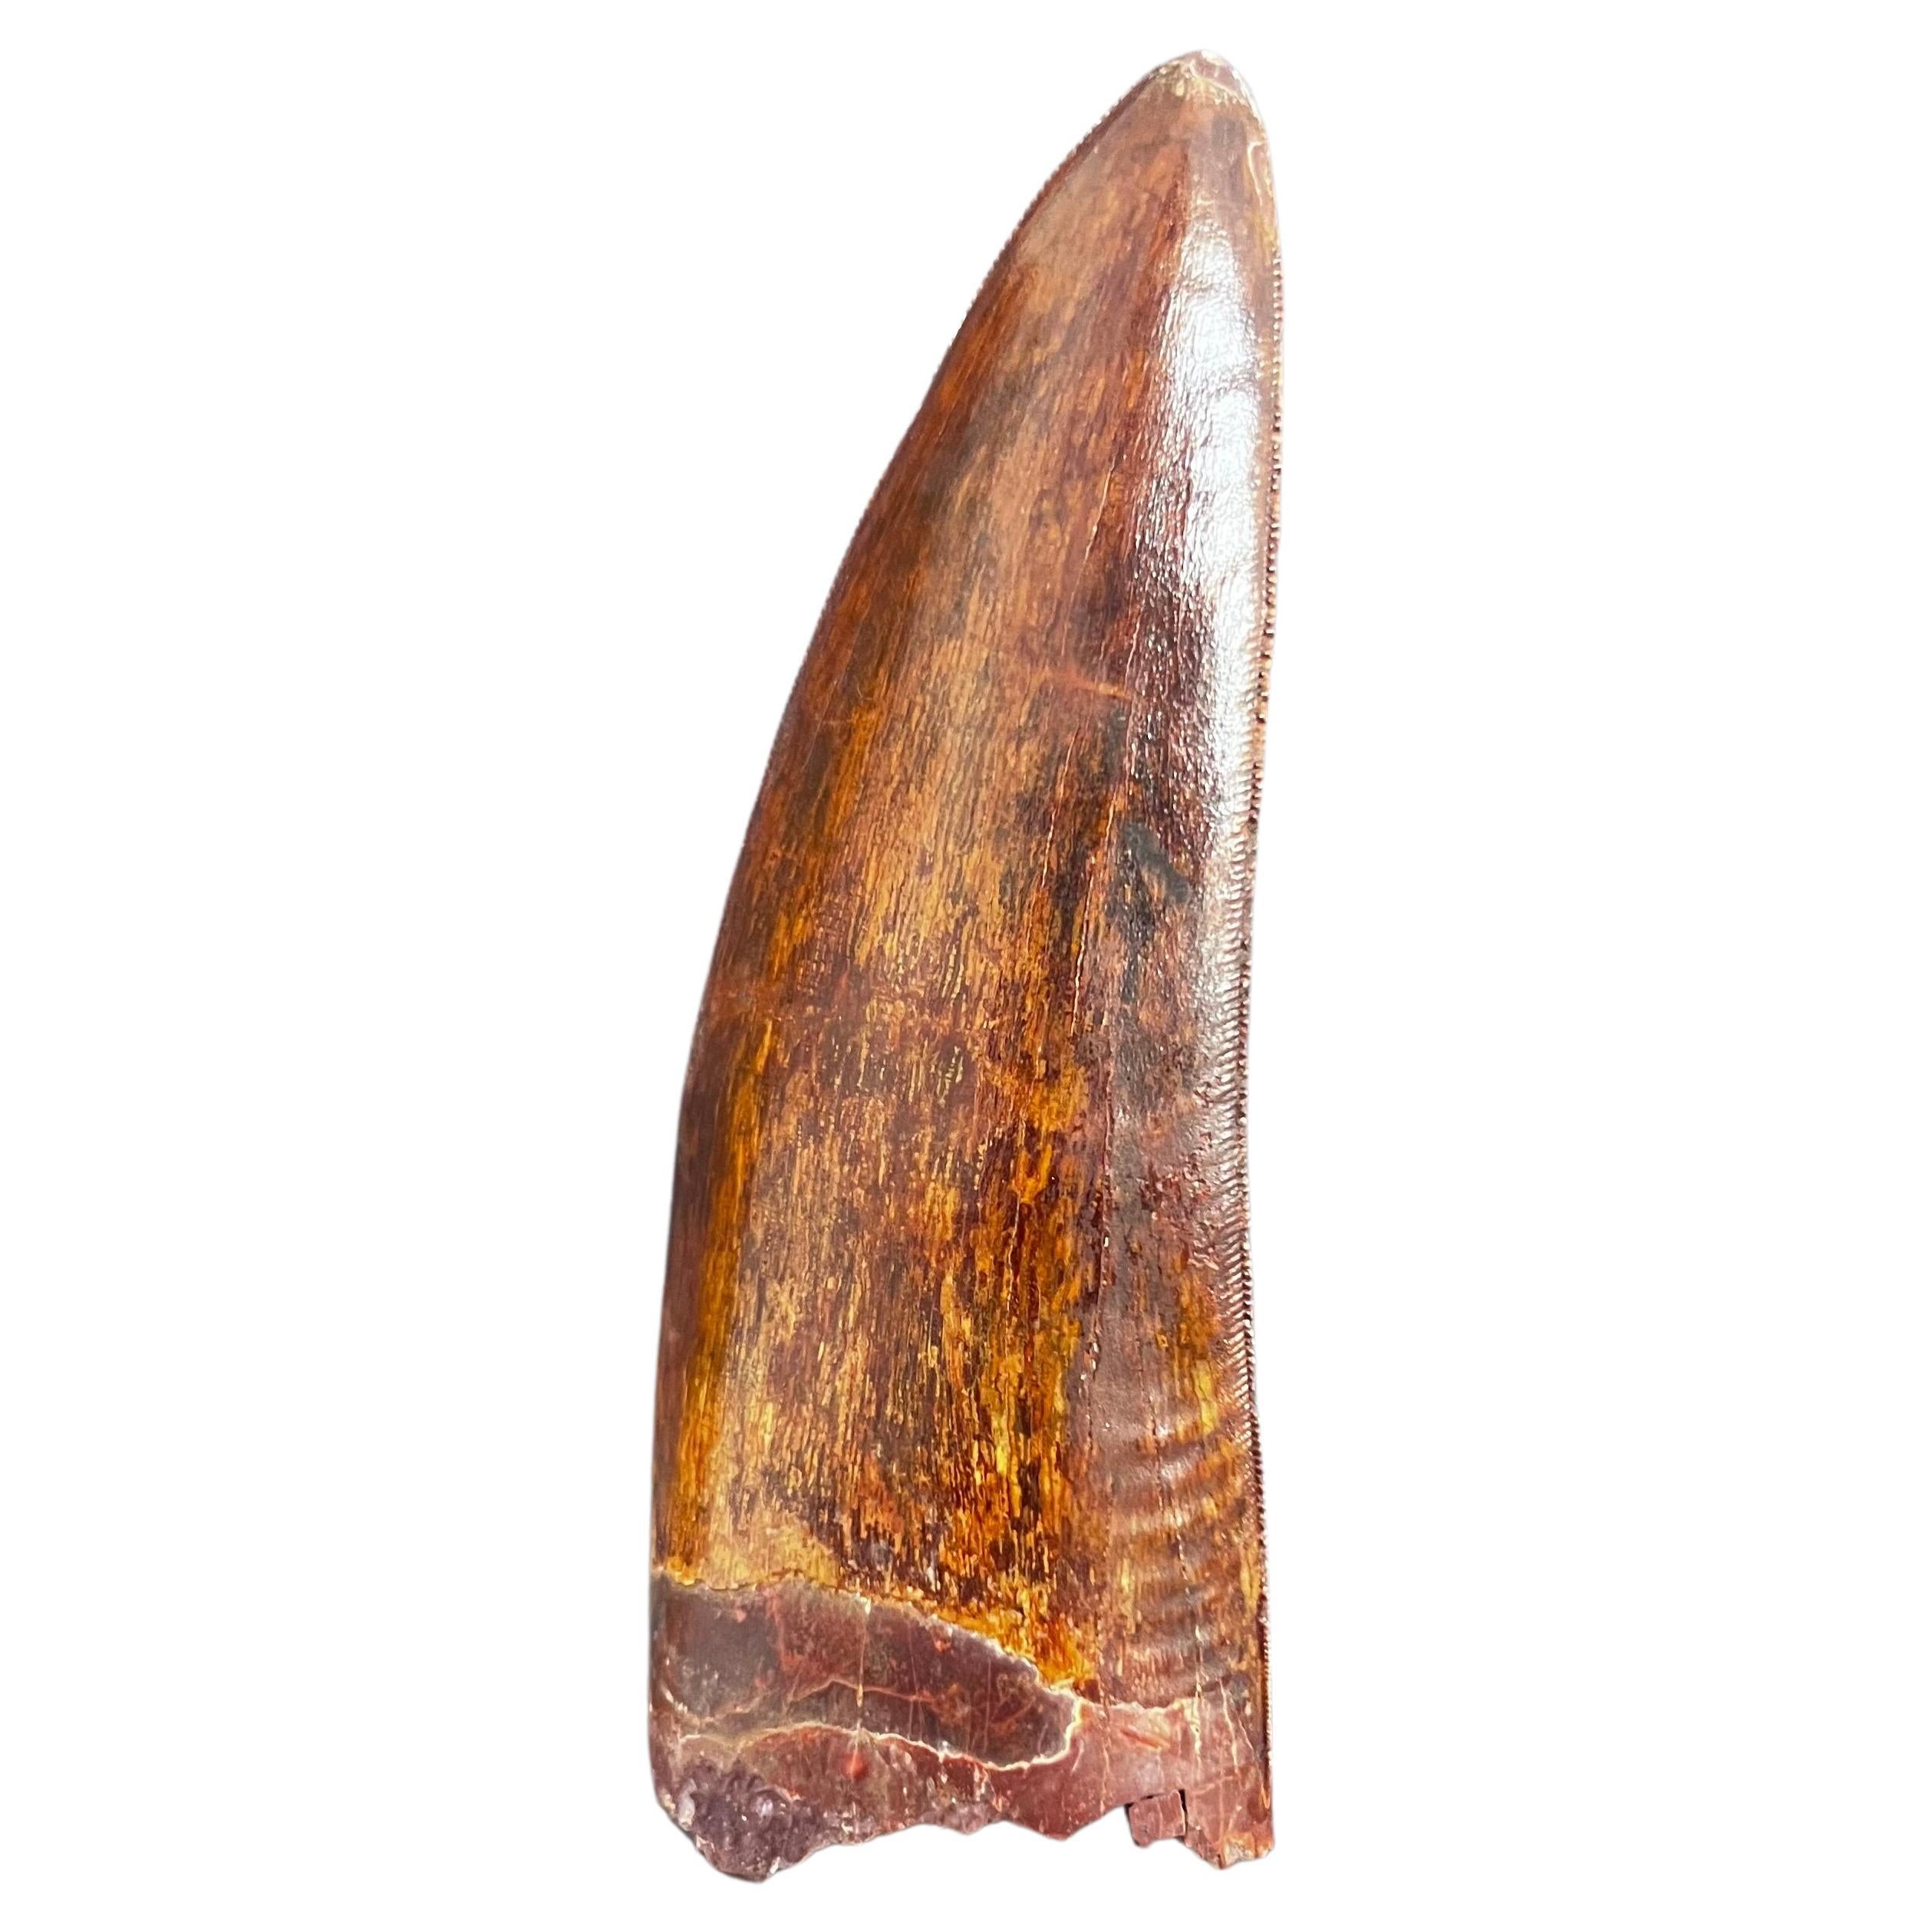 Selected Tooth of Carcharodontosaurus Dinosaur For Sale